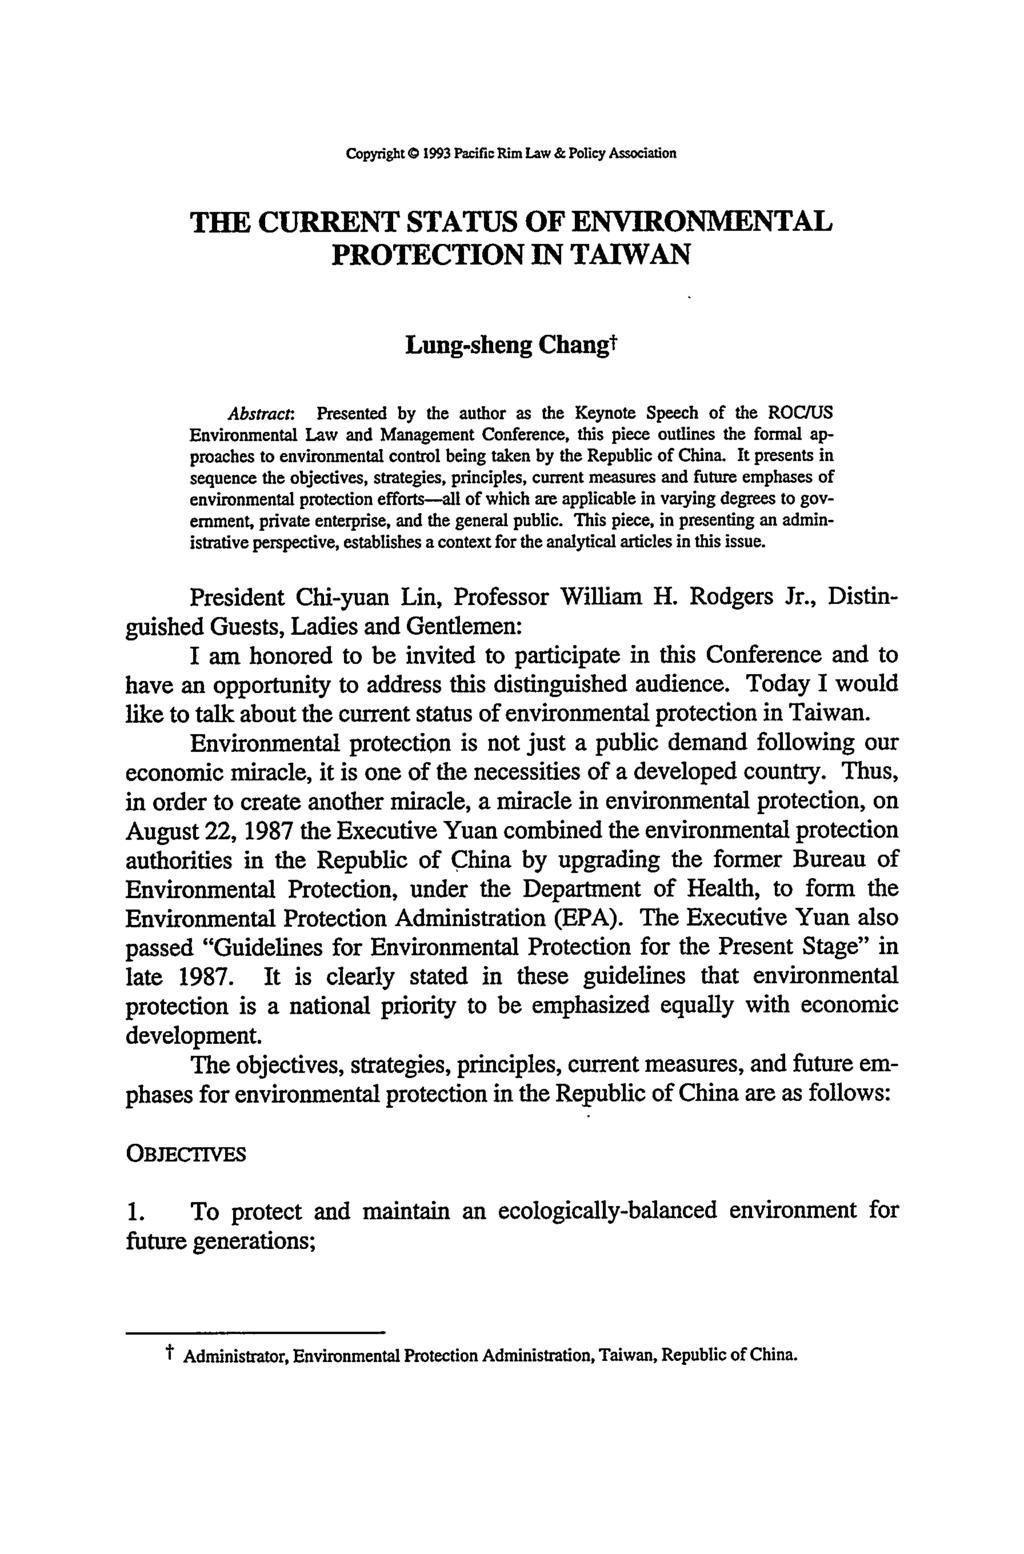 Copyright 0 1993 Pacific Rim Law & Policy Association THE CURRENT STATUS OF ENVIRONMENTAL PROTECTION IN TAIWAN Lung-sheng Changt Abstract Presented by the author as the Keynote Speech of the ROC/US